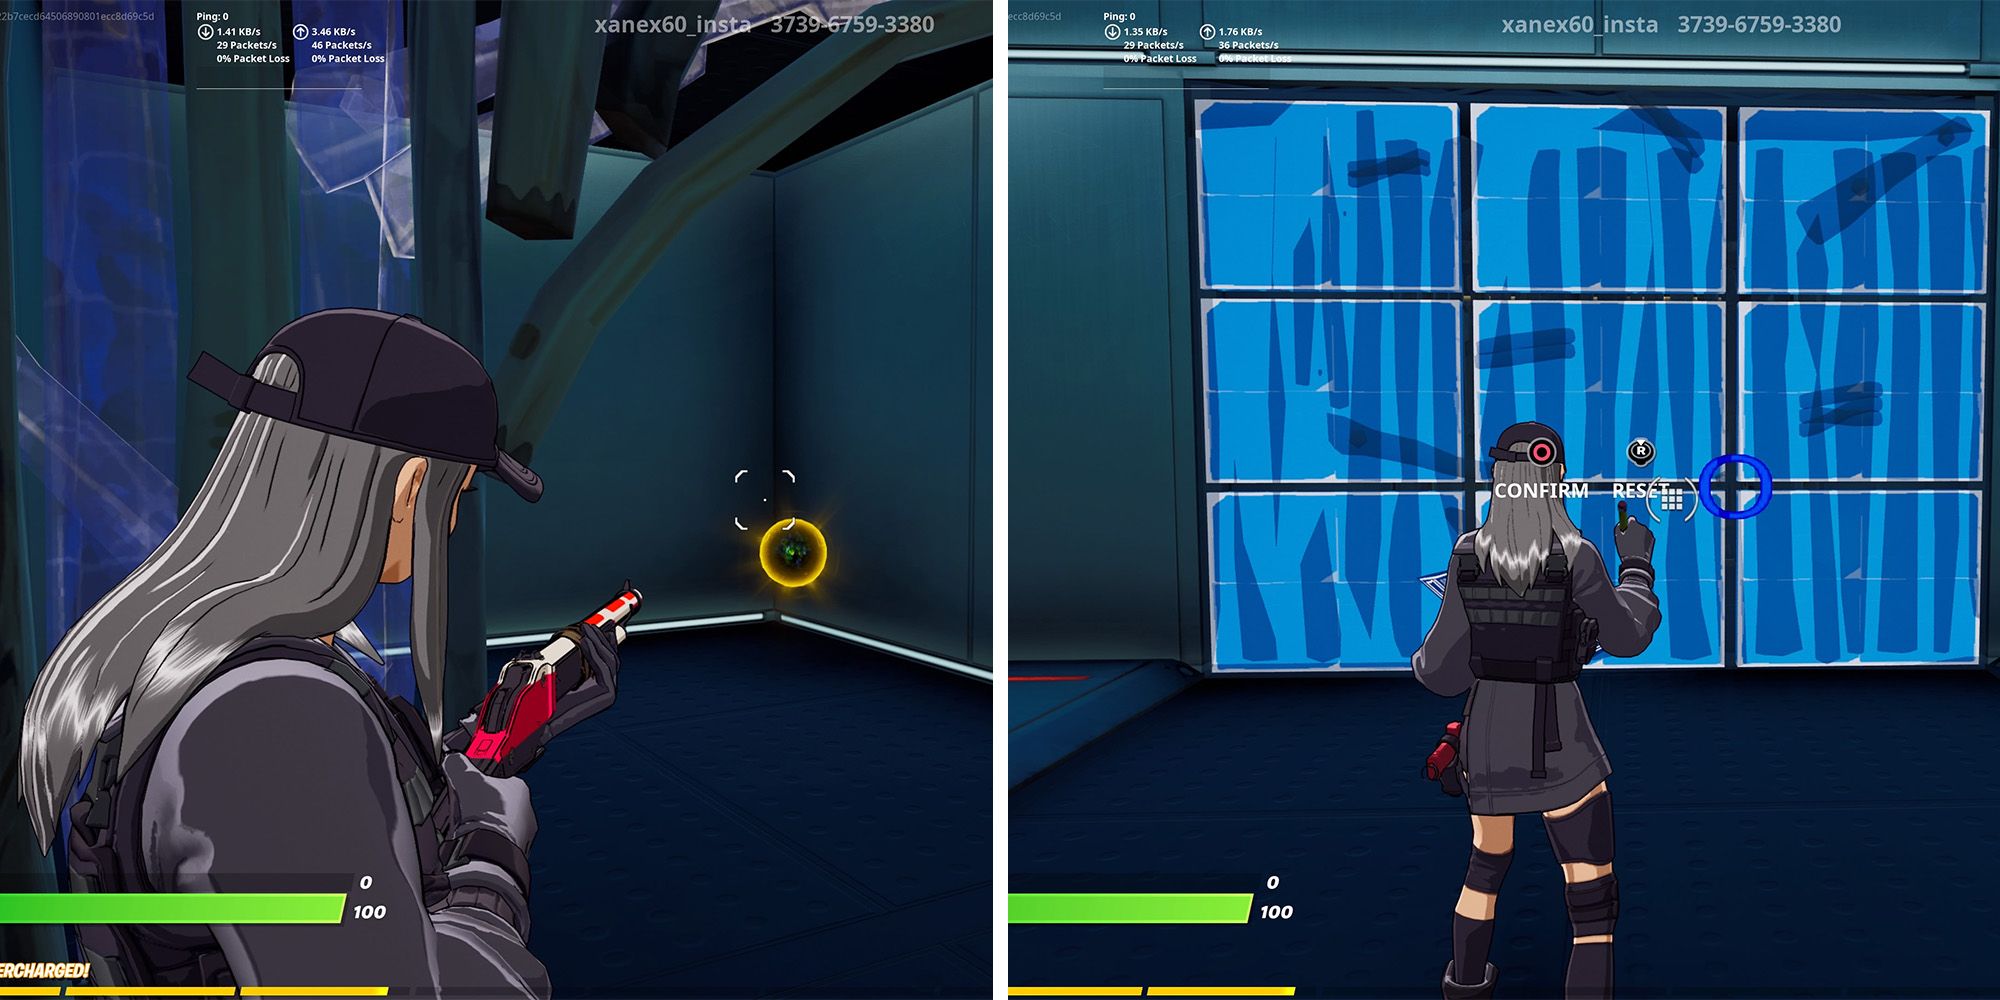 Edit course and aim trainer in Fortnite creative mode